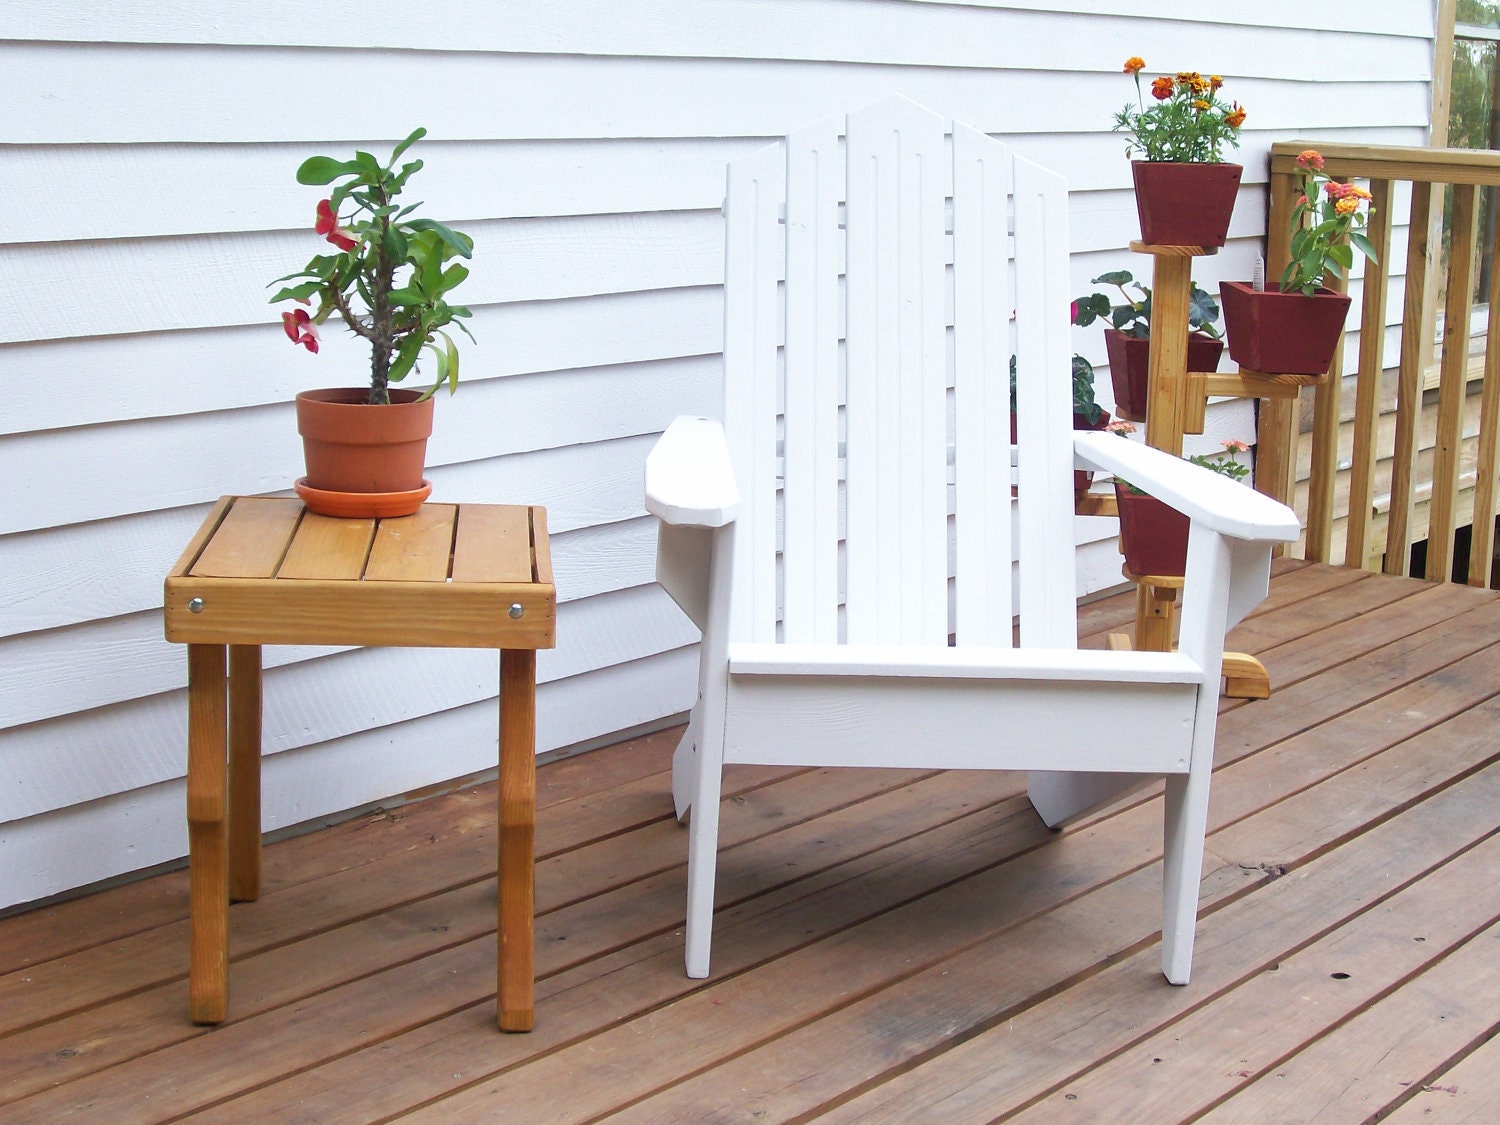 Galleries Related: Adirondack Chairs , Wooden Deck Chair Plans ,